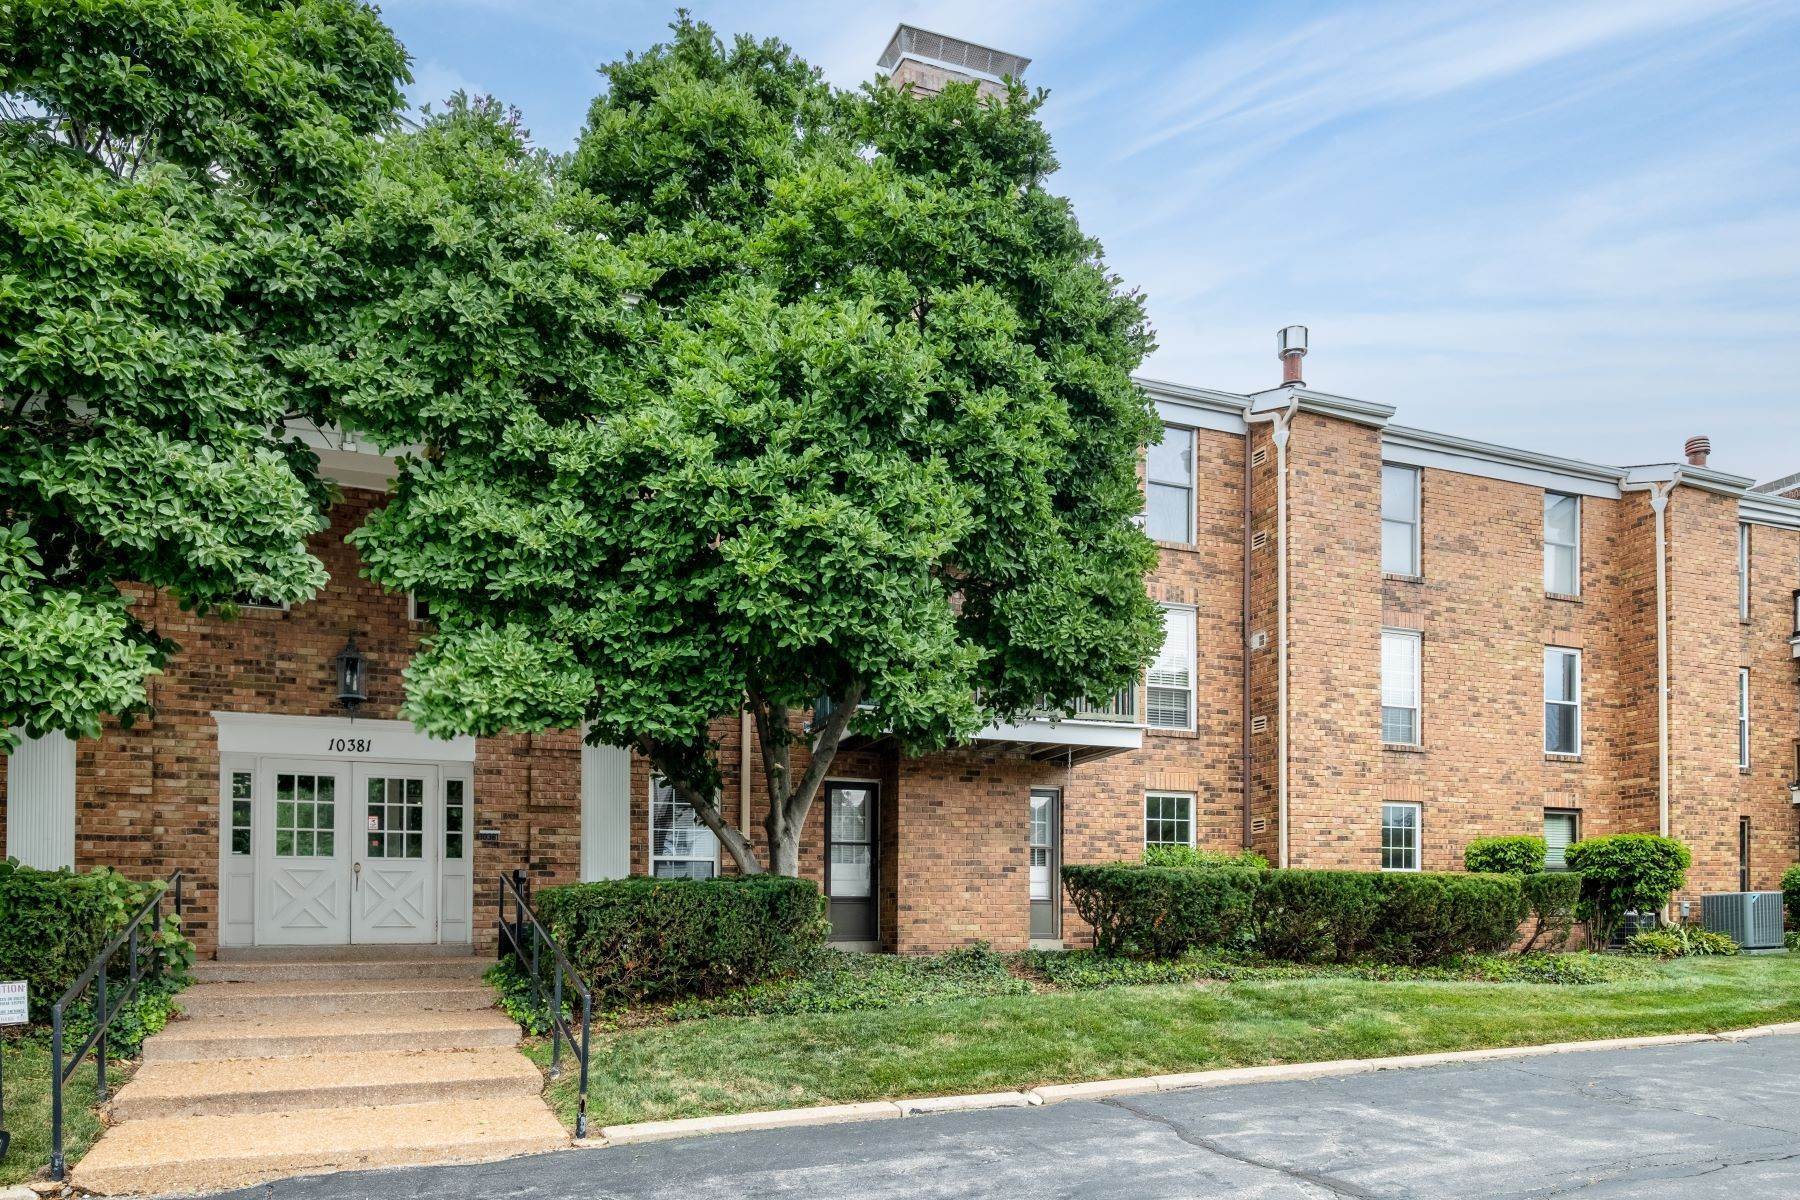 Property for Sale at Location, Location 2bed/2 bath condo in Manors of Oxford Hill 10381 Oxford Hill Drive #5 St. Louis, Missouri 63146 United States